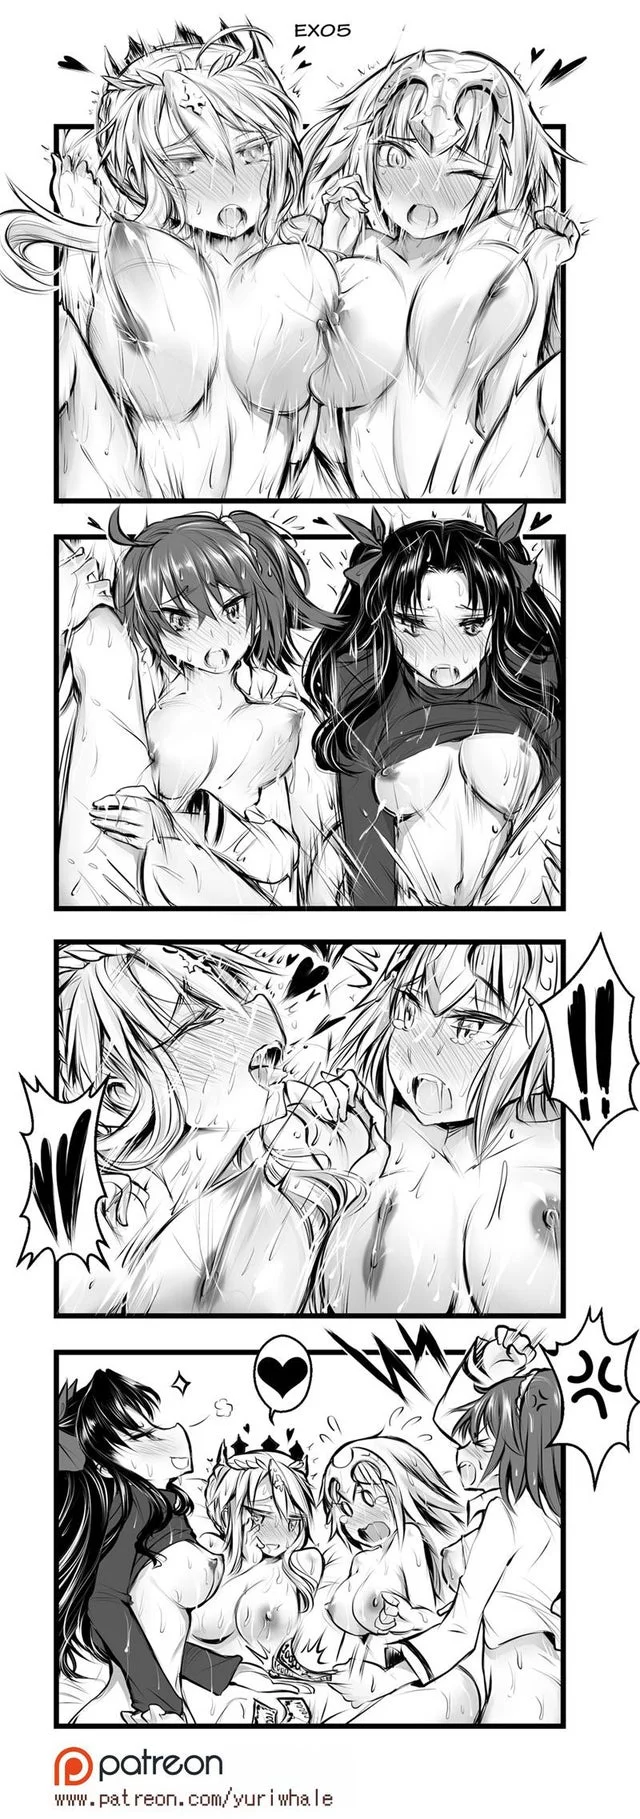 Who can make their lover orgasm fastest? (YuriWhale) [Fate]